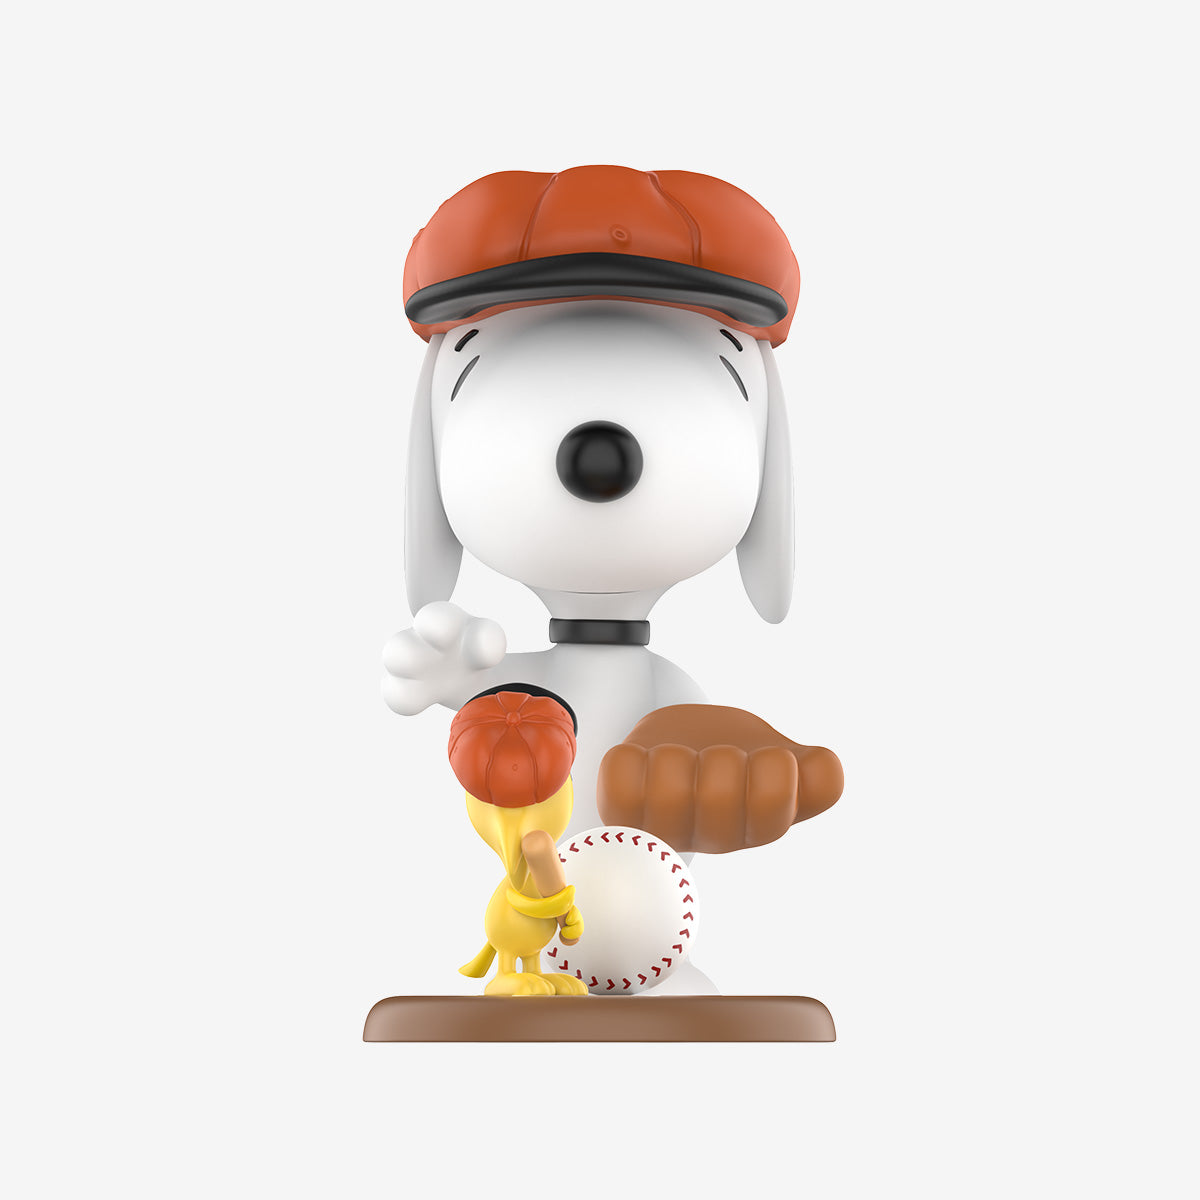 Snoopy the Best Friends Series Figures